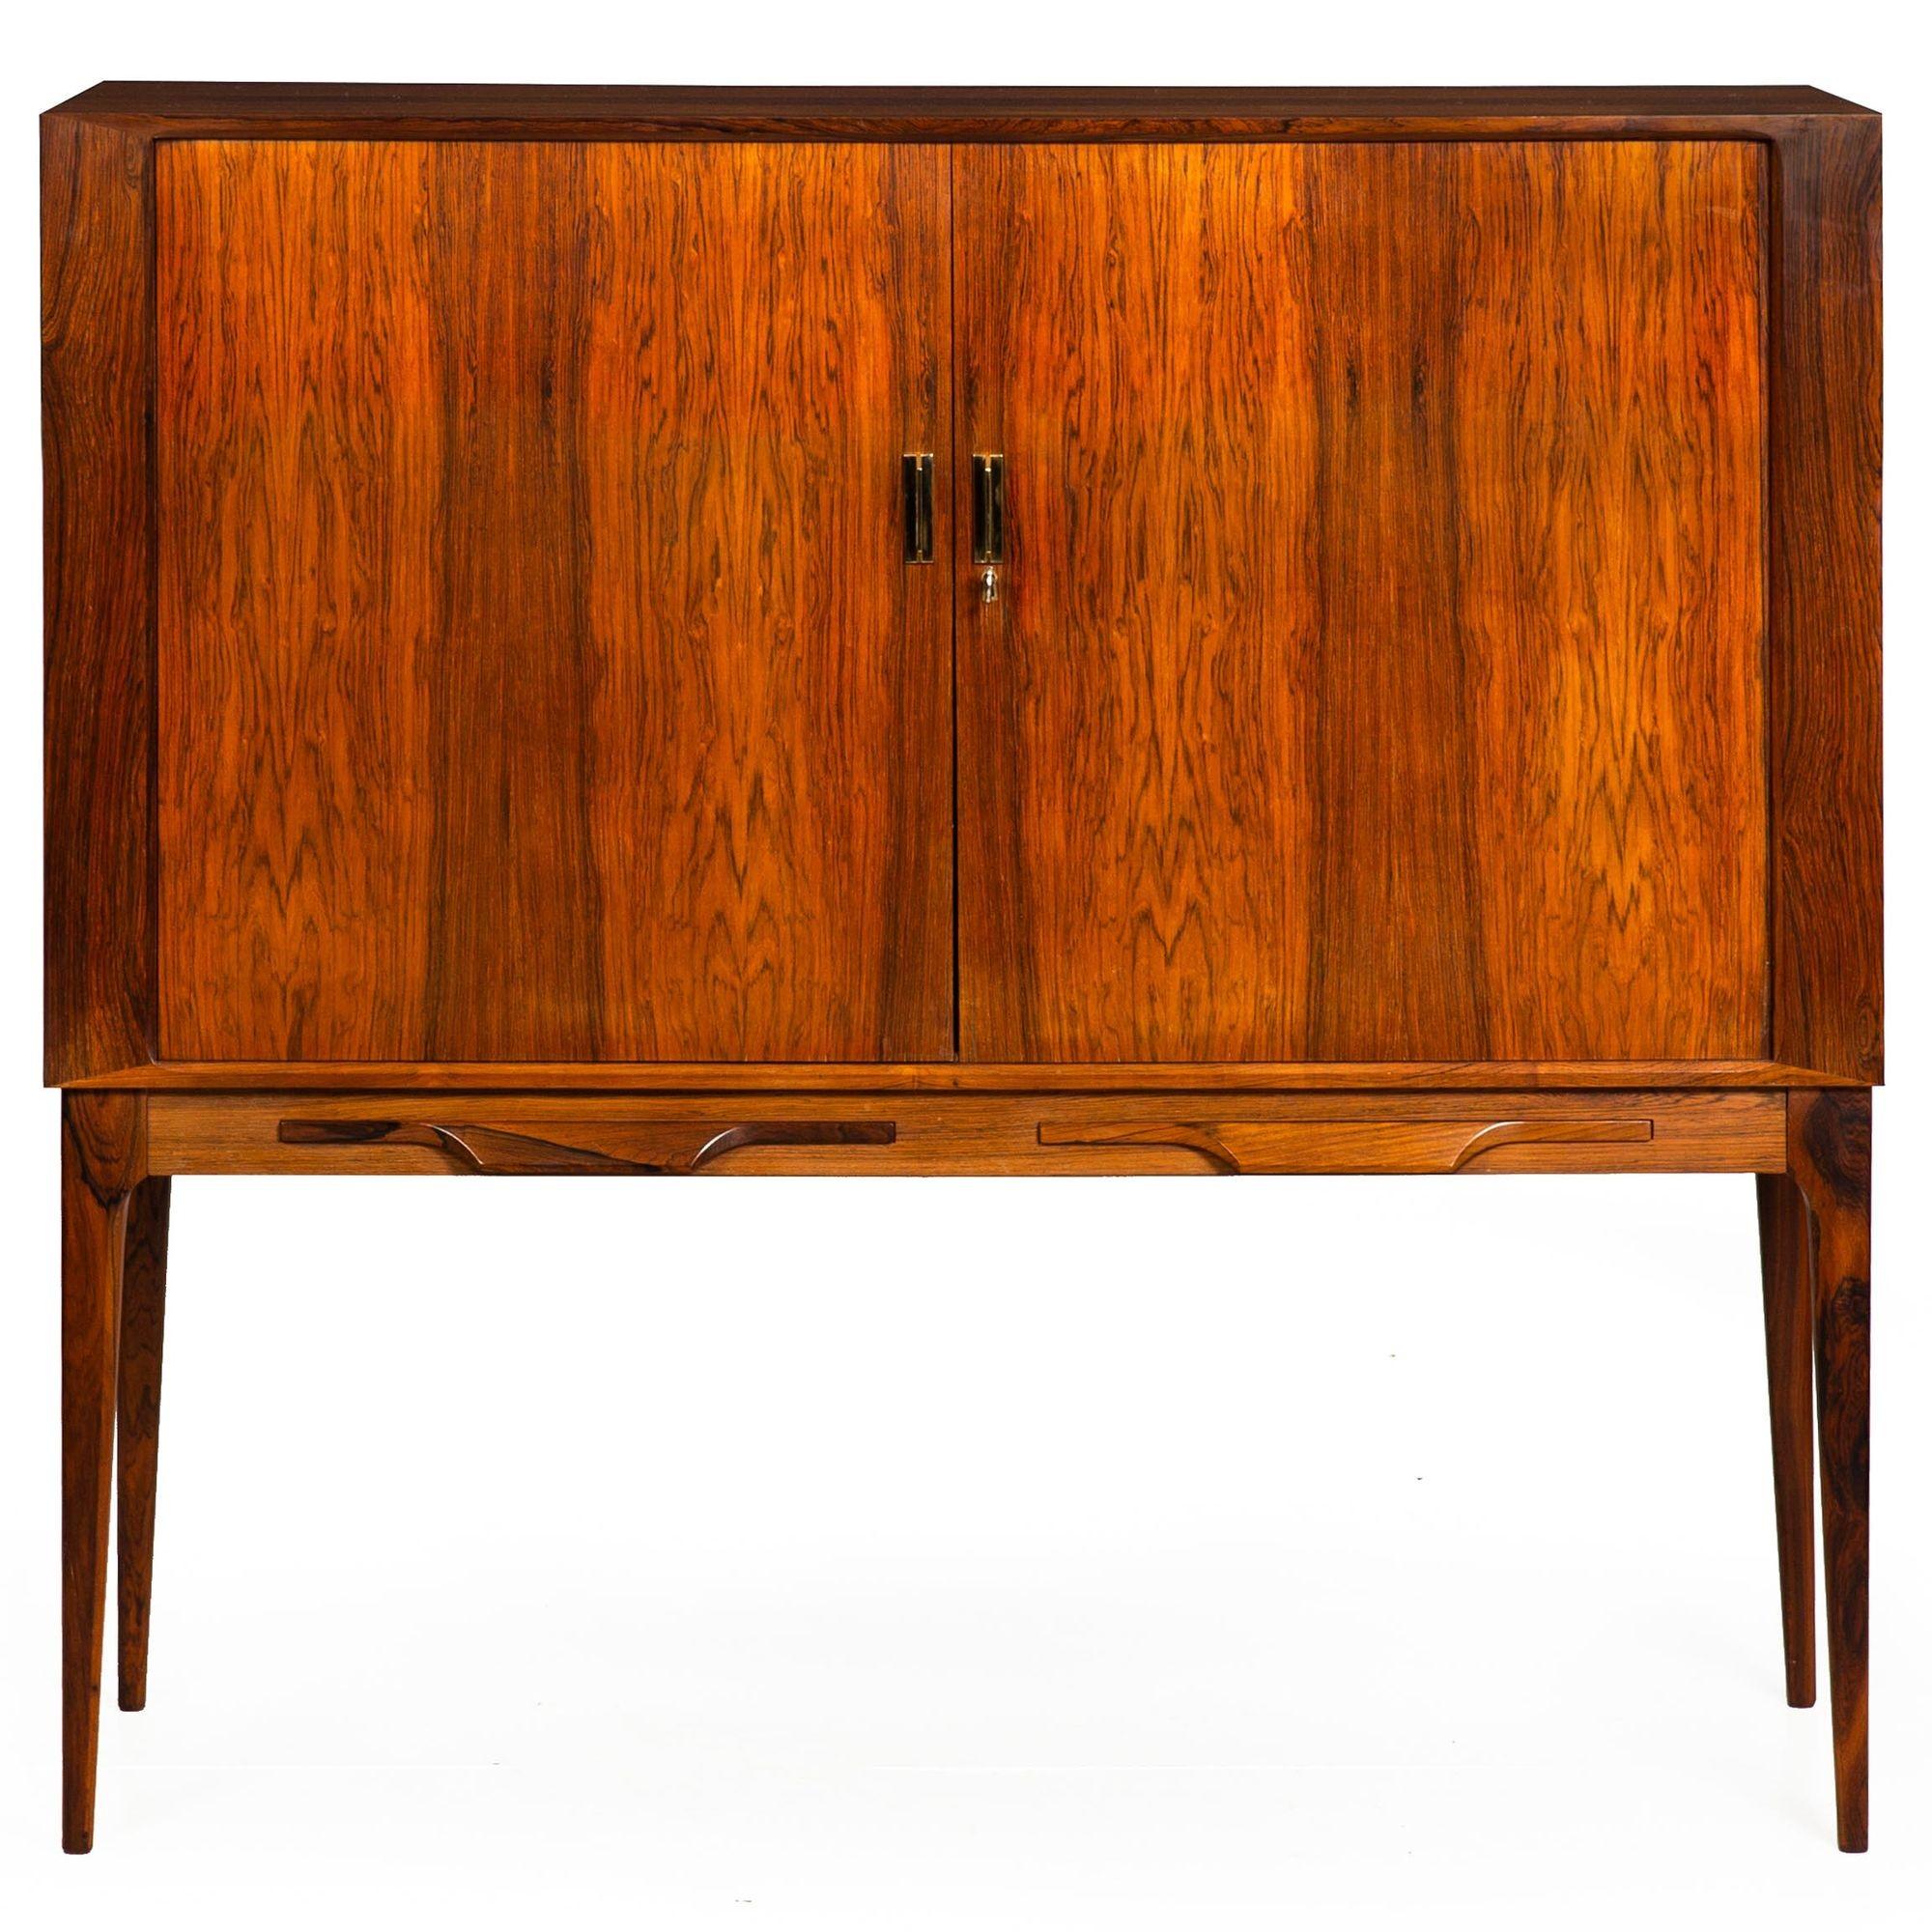 RARE DANISH MODERN ROSEWOOD, BRASS AND GLASS TAMBOUR-FRONT DRY BAR CABINET
Designed by Kurt Ostervig  circa 1960s  unmarked
Item # 311WAH13A 

An exceedingly beautiful and quite rare tambour-front dry bar cabinet designed by the Danish furniture